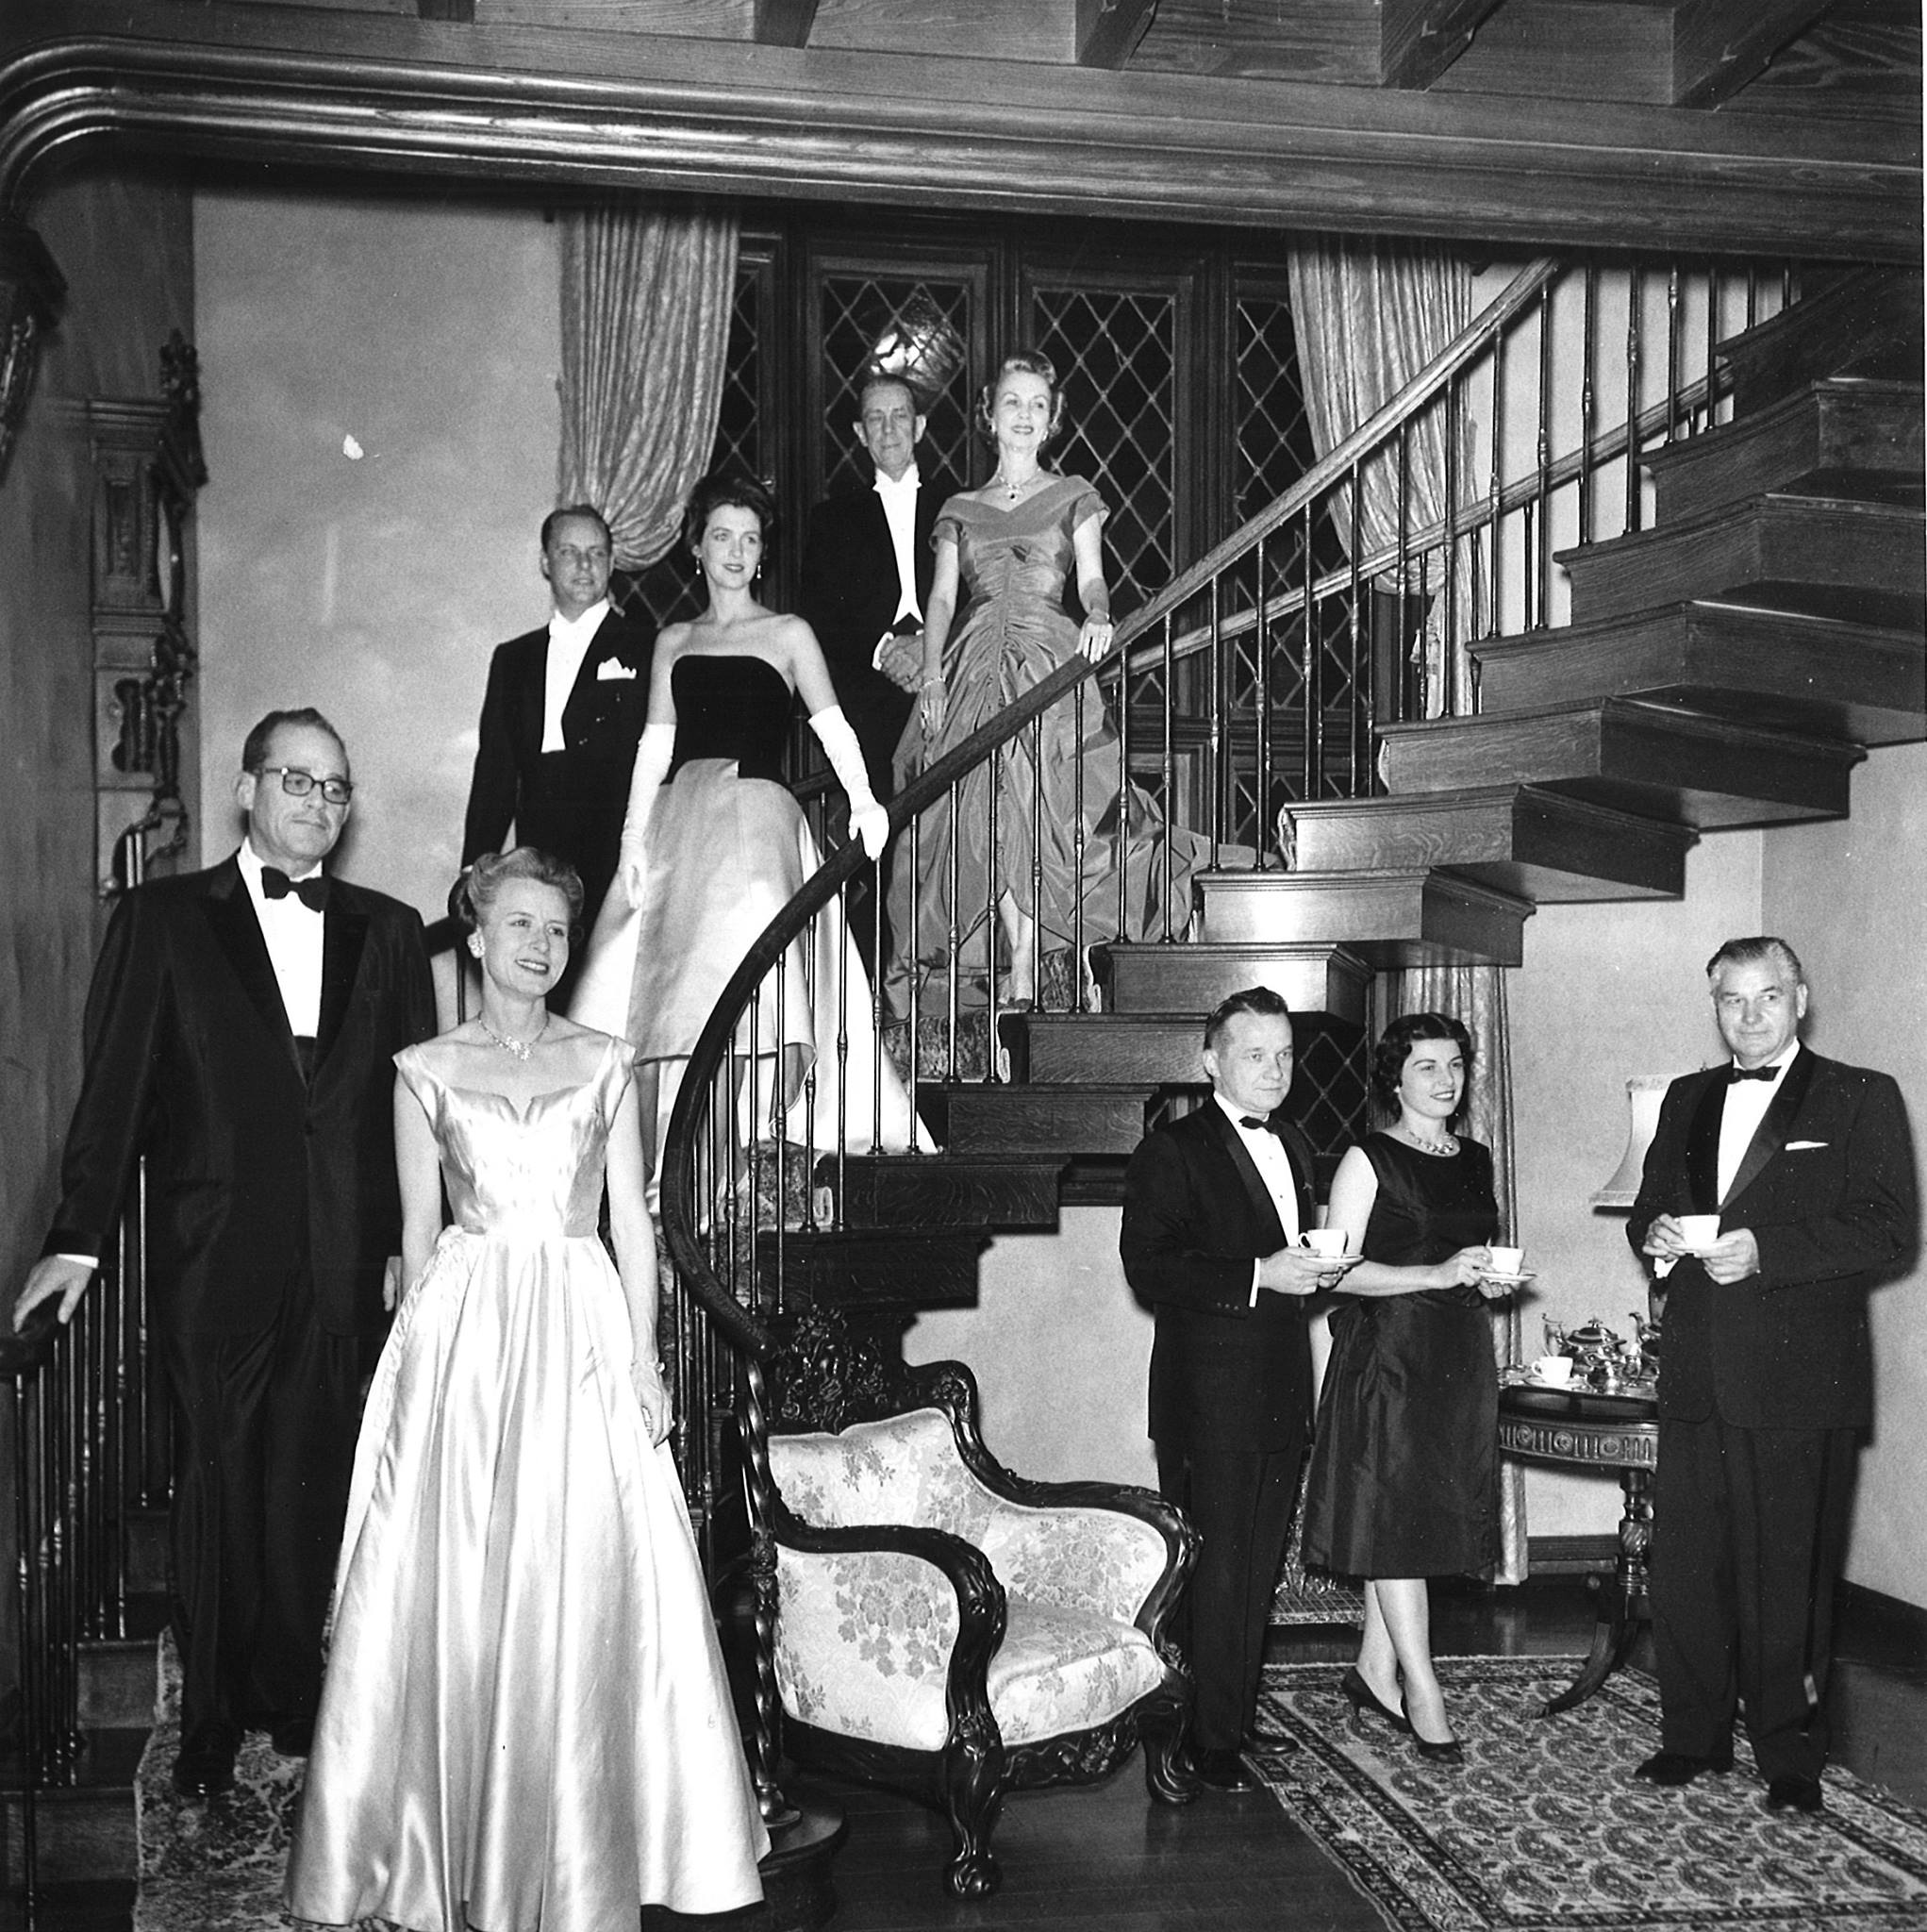 Sybil Harrington at one of her balls (Pictured in Green Dior dress, highest on staircase)